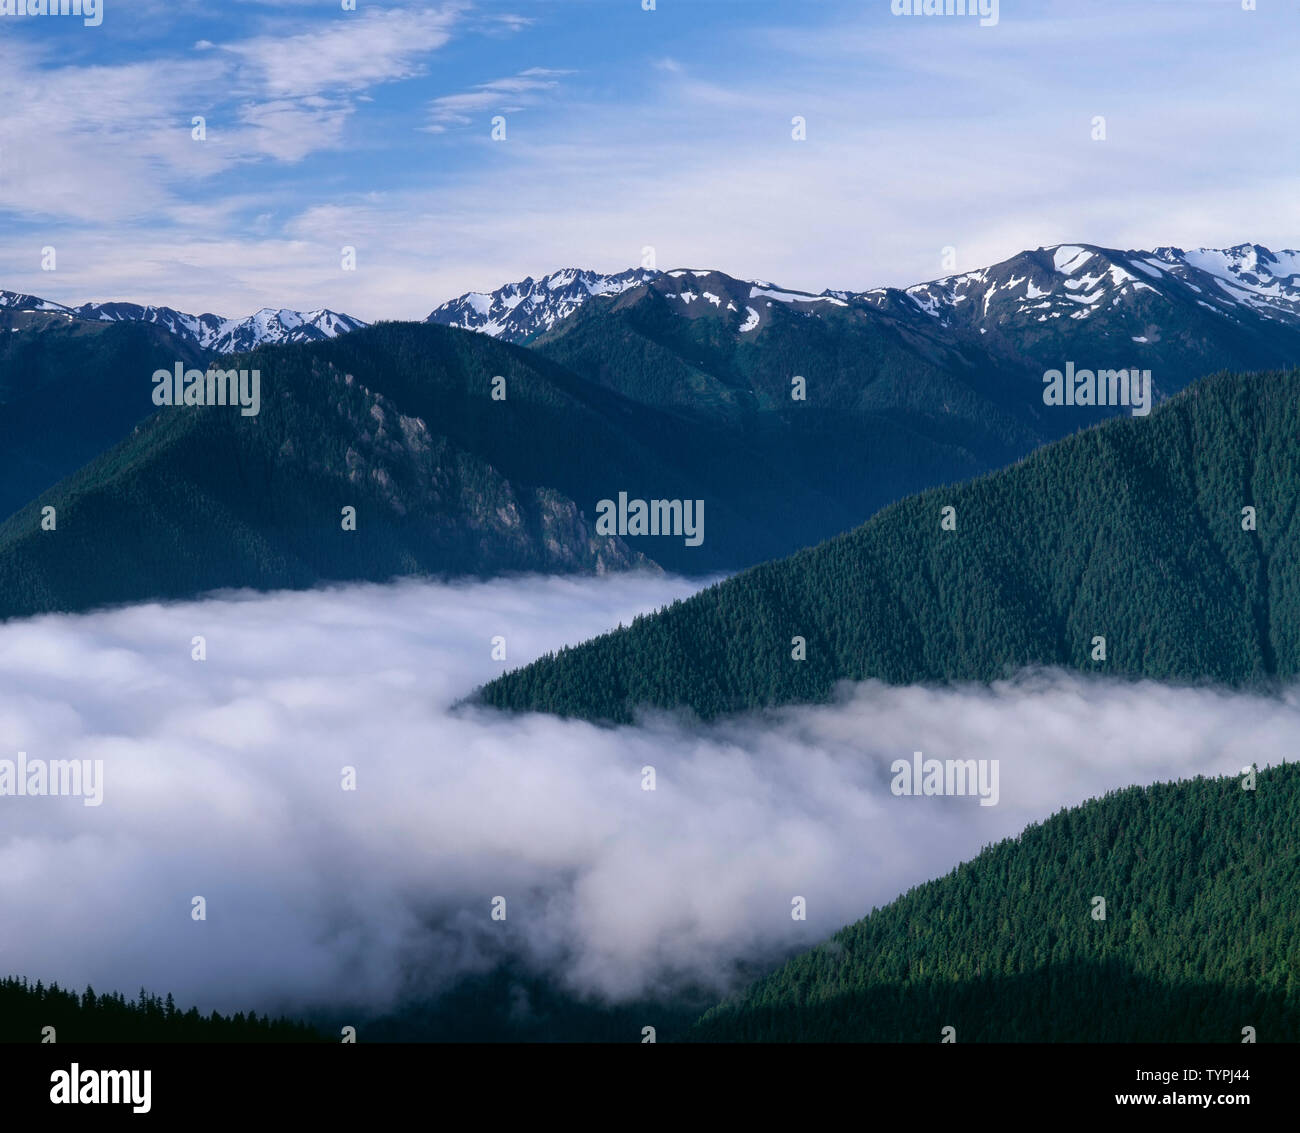 USA, Washington, Olympic National Park, Morning fog fills converging valley bottoms, view south from Deer Park. Stock Photo